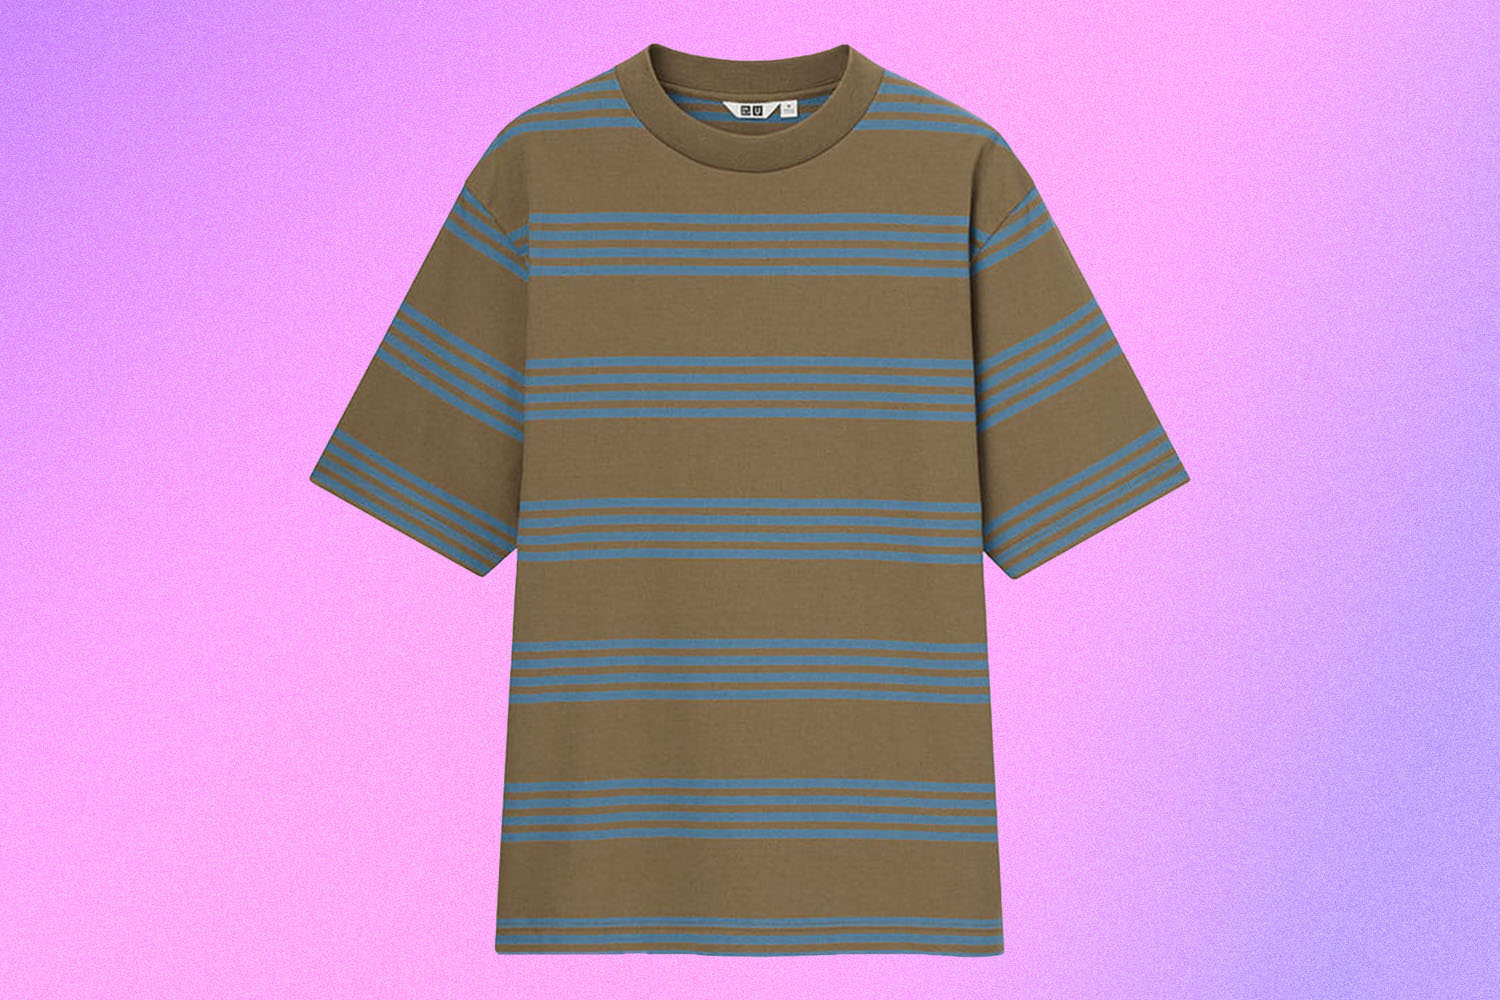 a striped brown and blue tee on a purple background